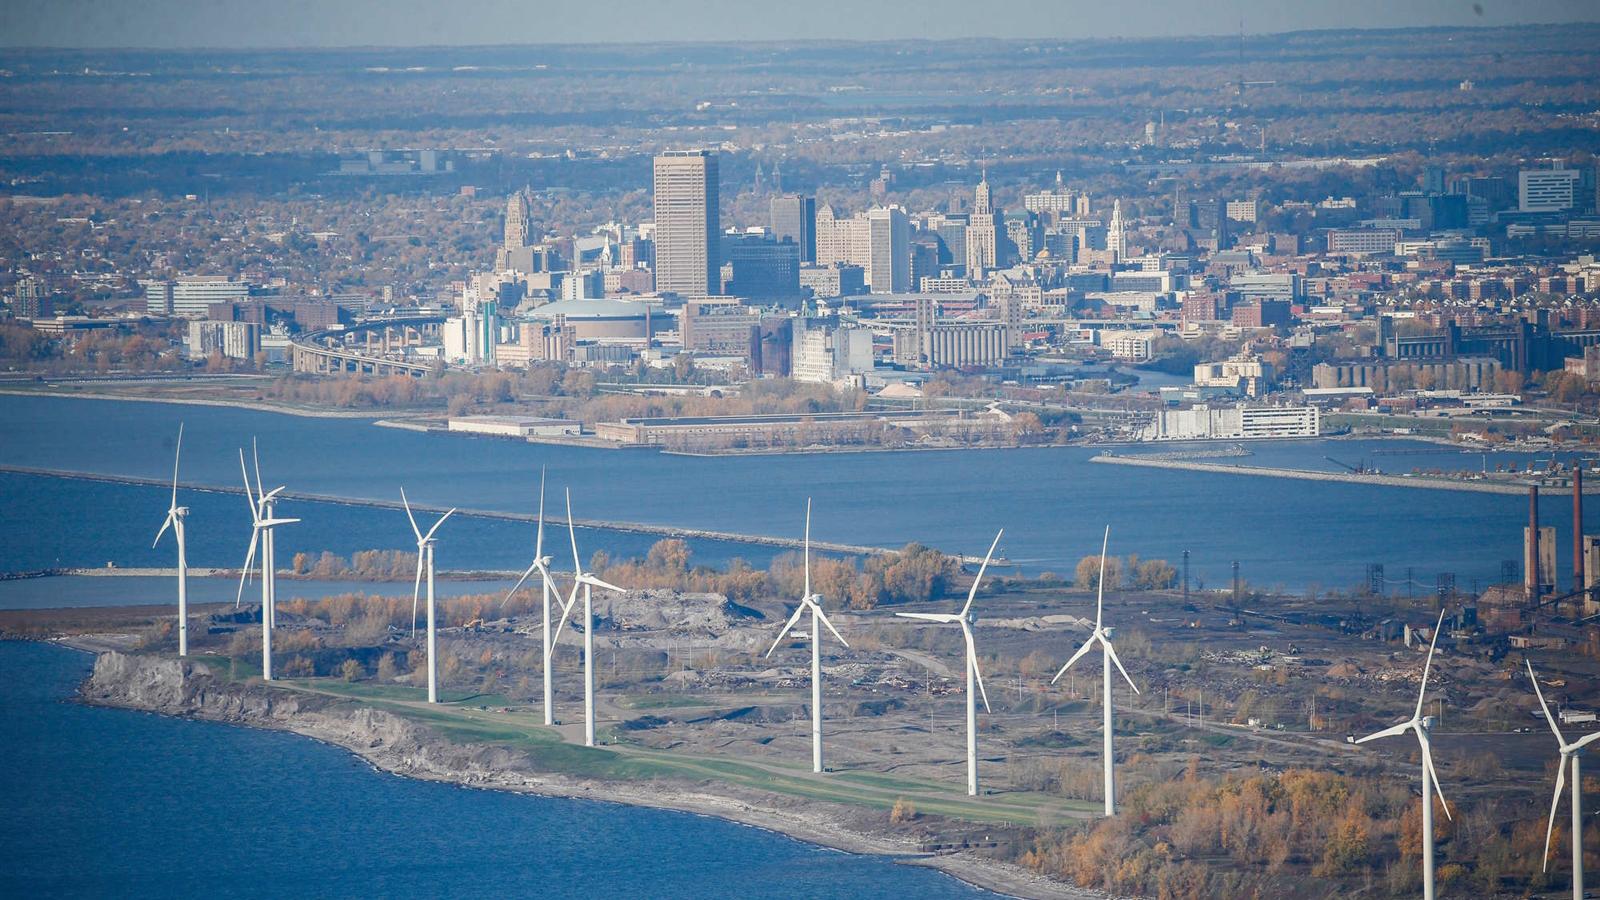 Fourteen wind turbines on the shores of Lake Erie power enough energy for about 10,000 homes. One of the world’s largest steel mills formerly occupied the site.  